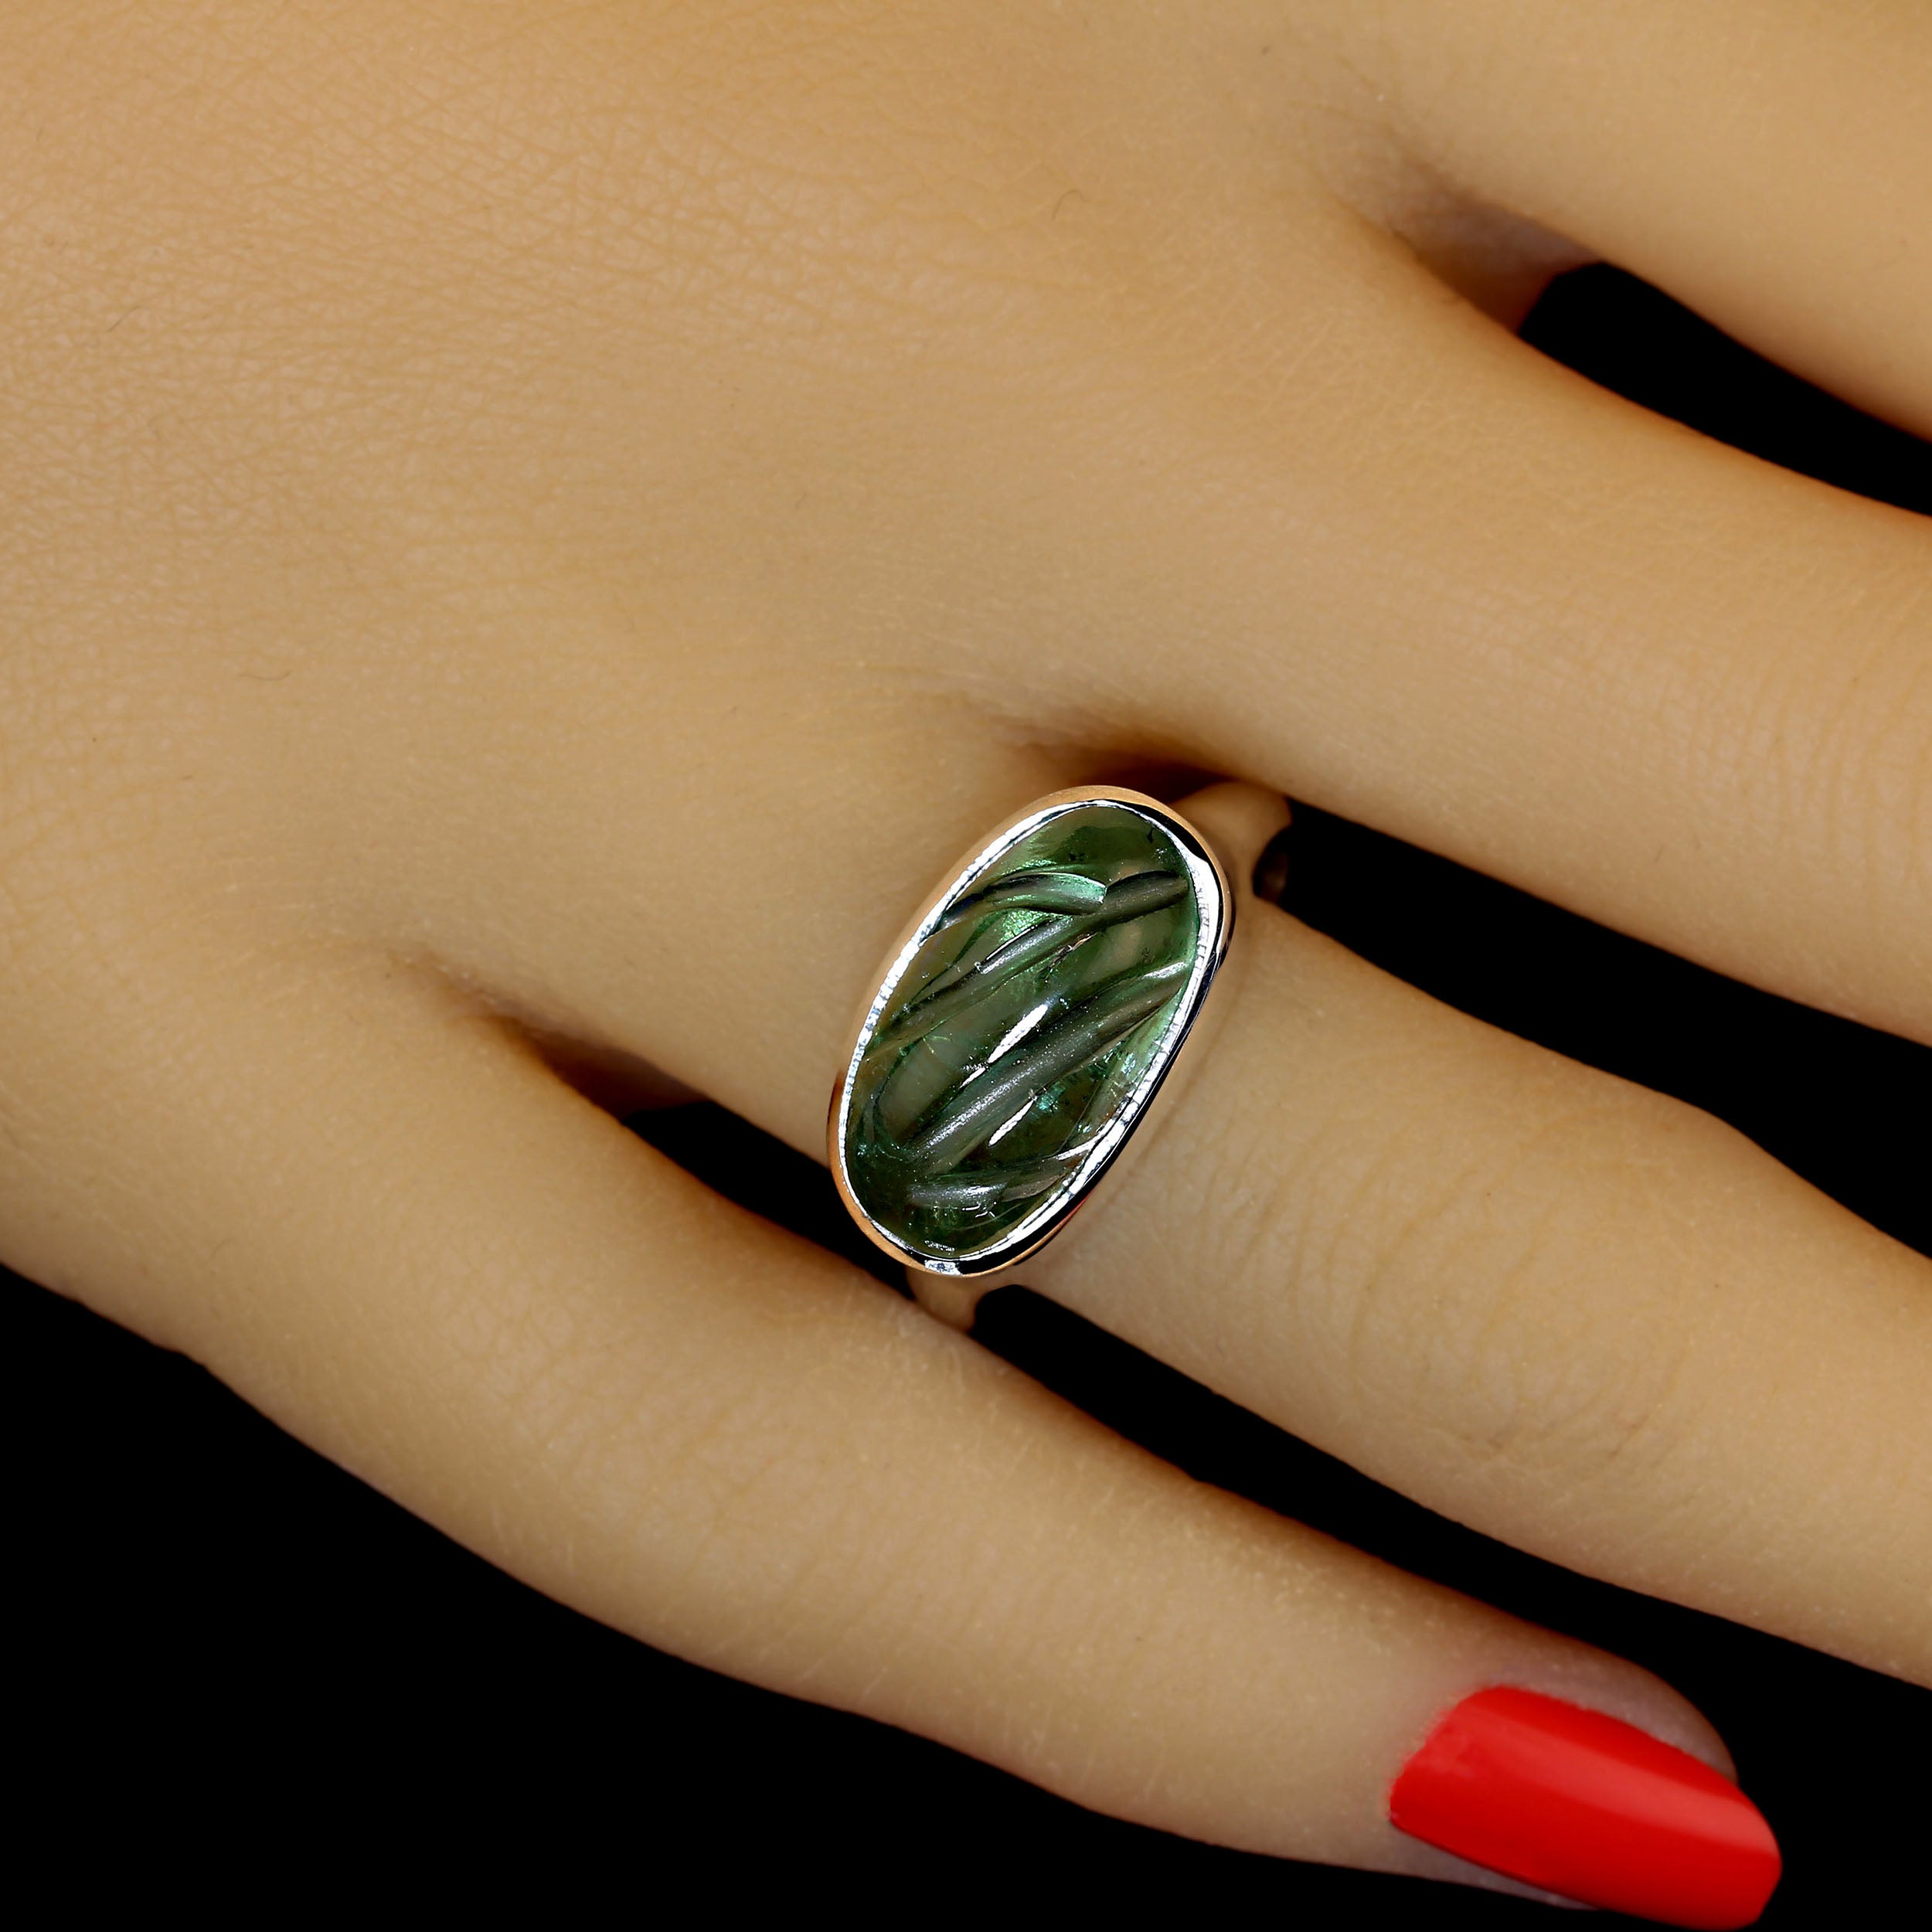 Unique, carved green tourmaline in a custom made Sterling Silver ring.  The east-west bezel setting is absolutely beautiful.  The smooth sterling silver sits elegantly on your hand. The beauty of Tourmaline and its widest range of vibrant colors are